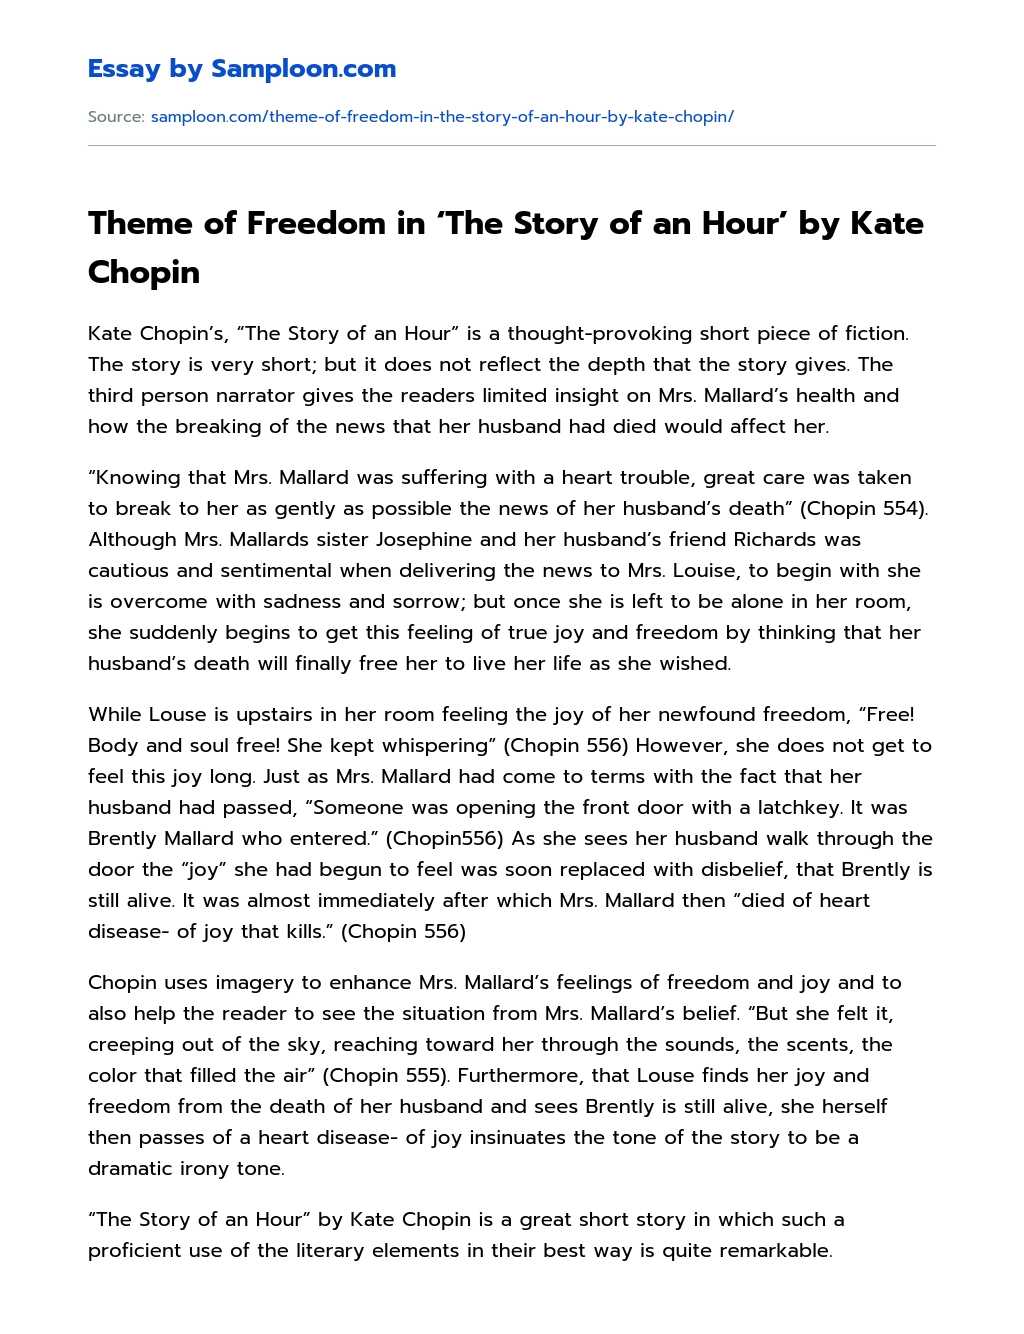 Theme of Freedom in ‘The Story of an Hour’ by Kate Chopin essay